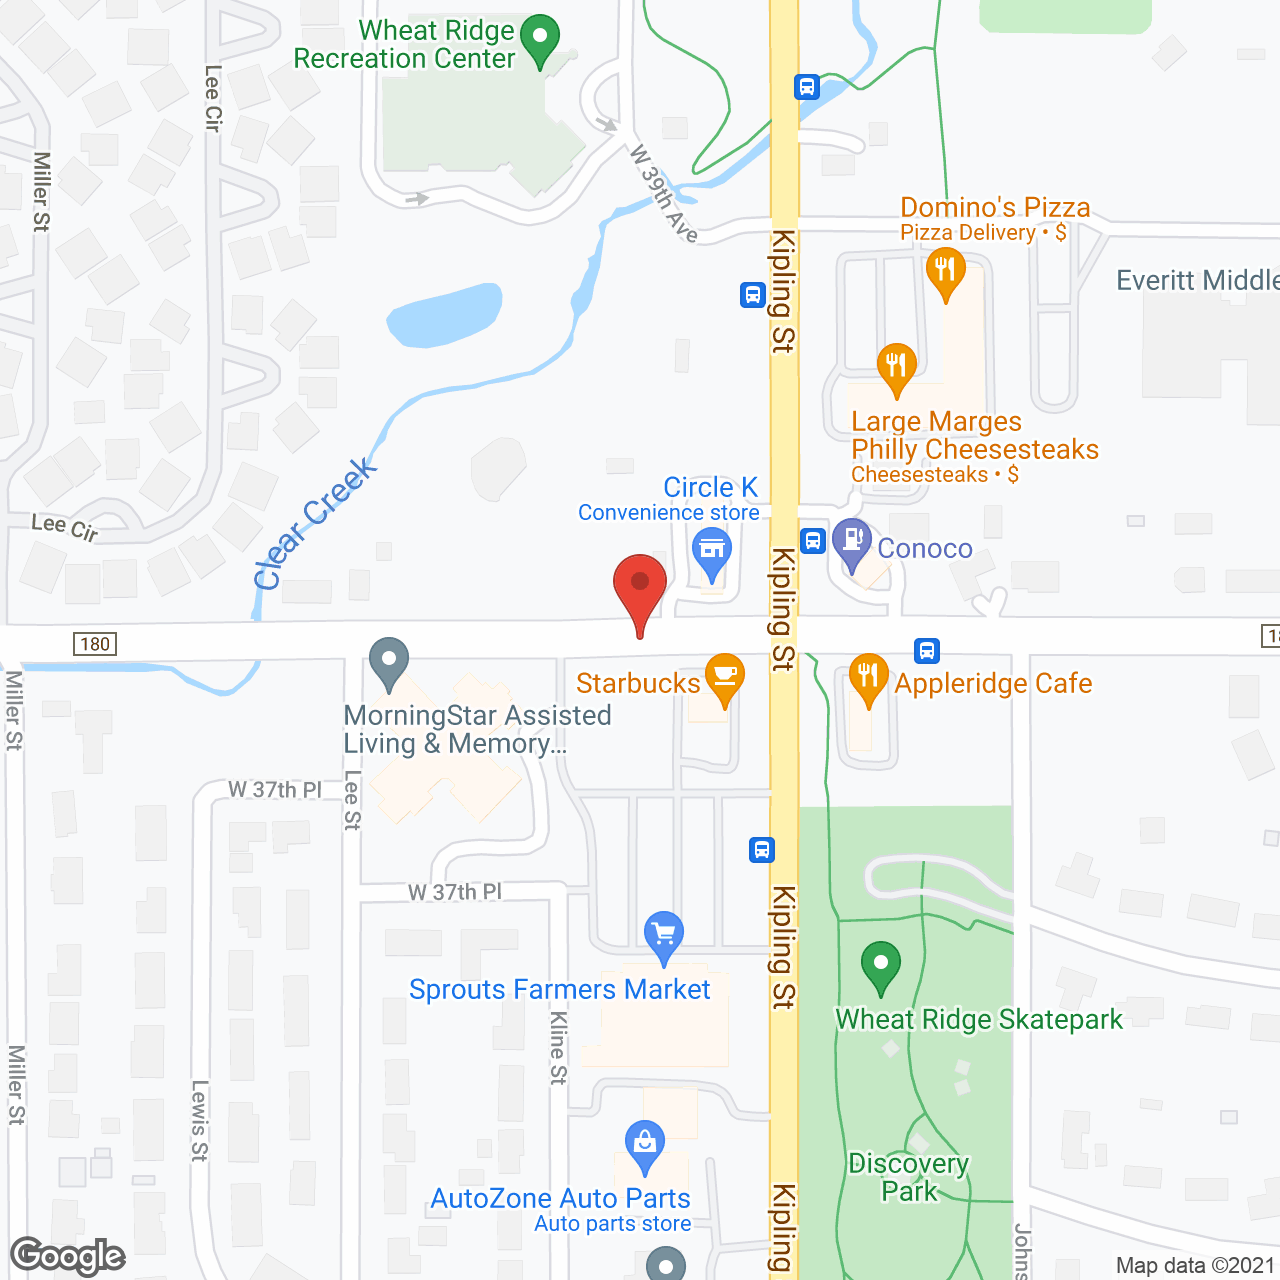 MorningStar Assisted Living & Memory Care of Wheat Ridge in google map